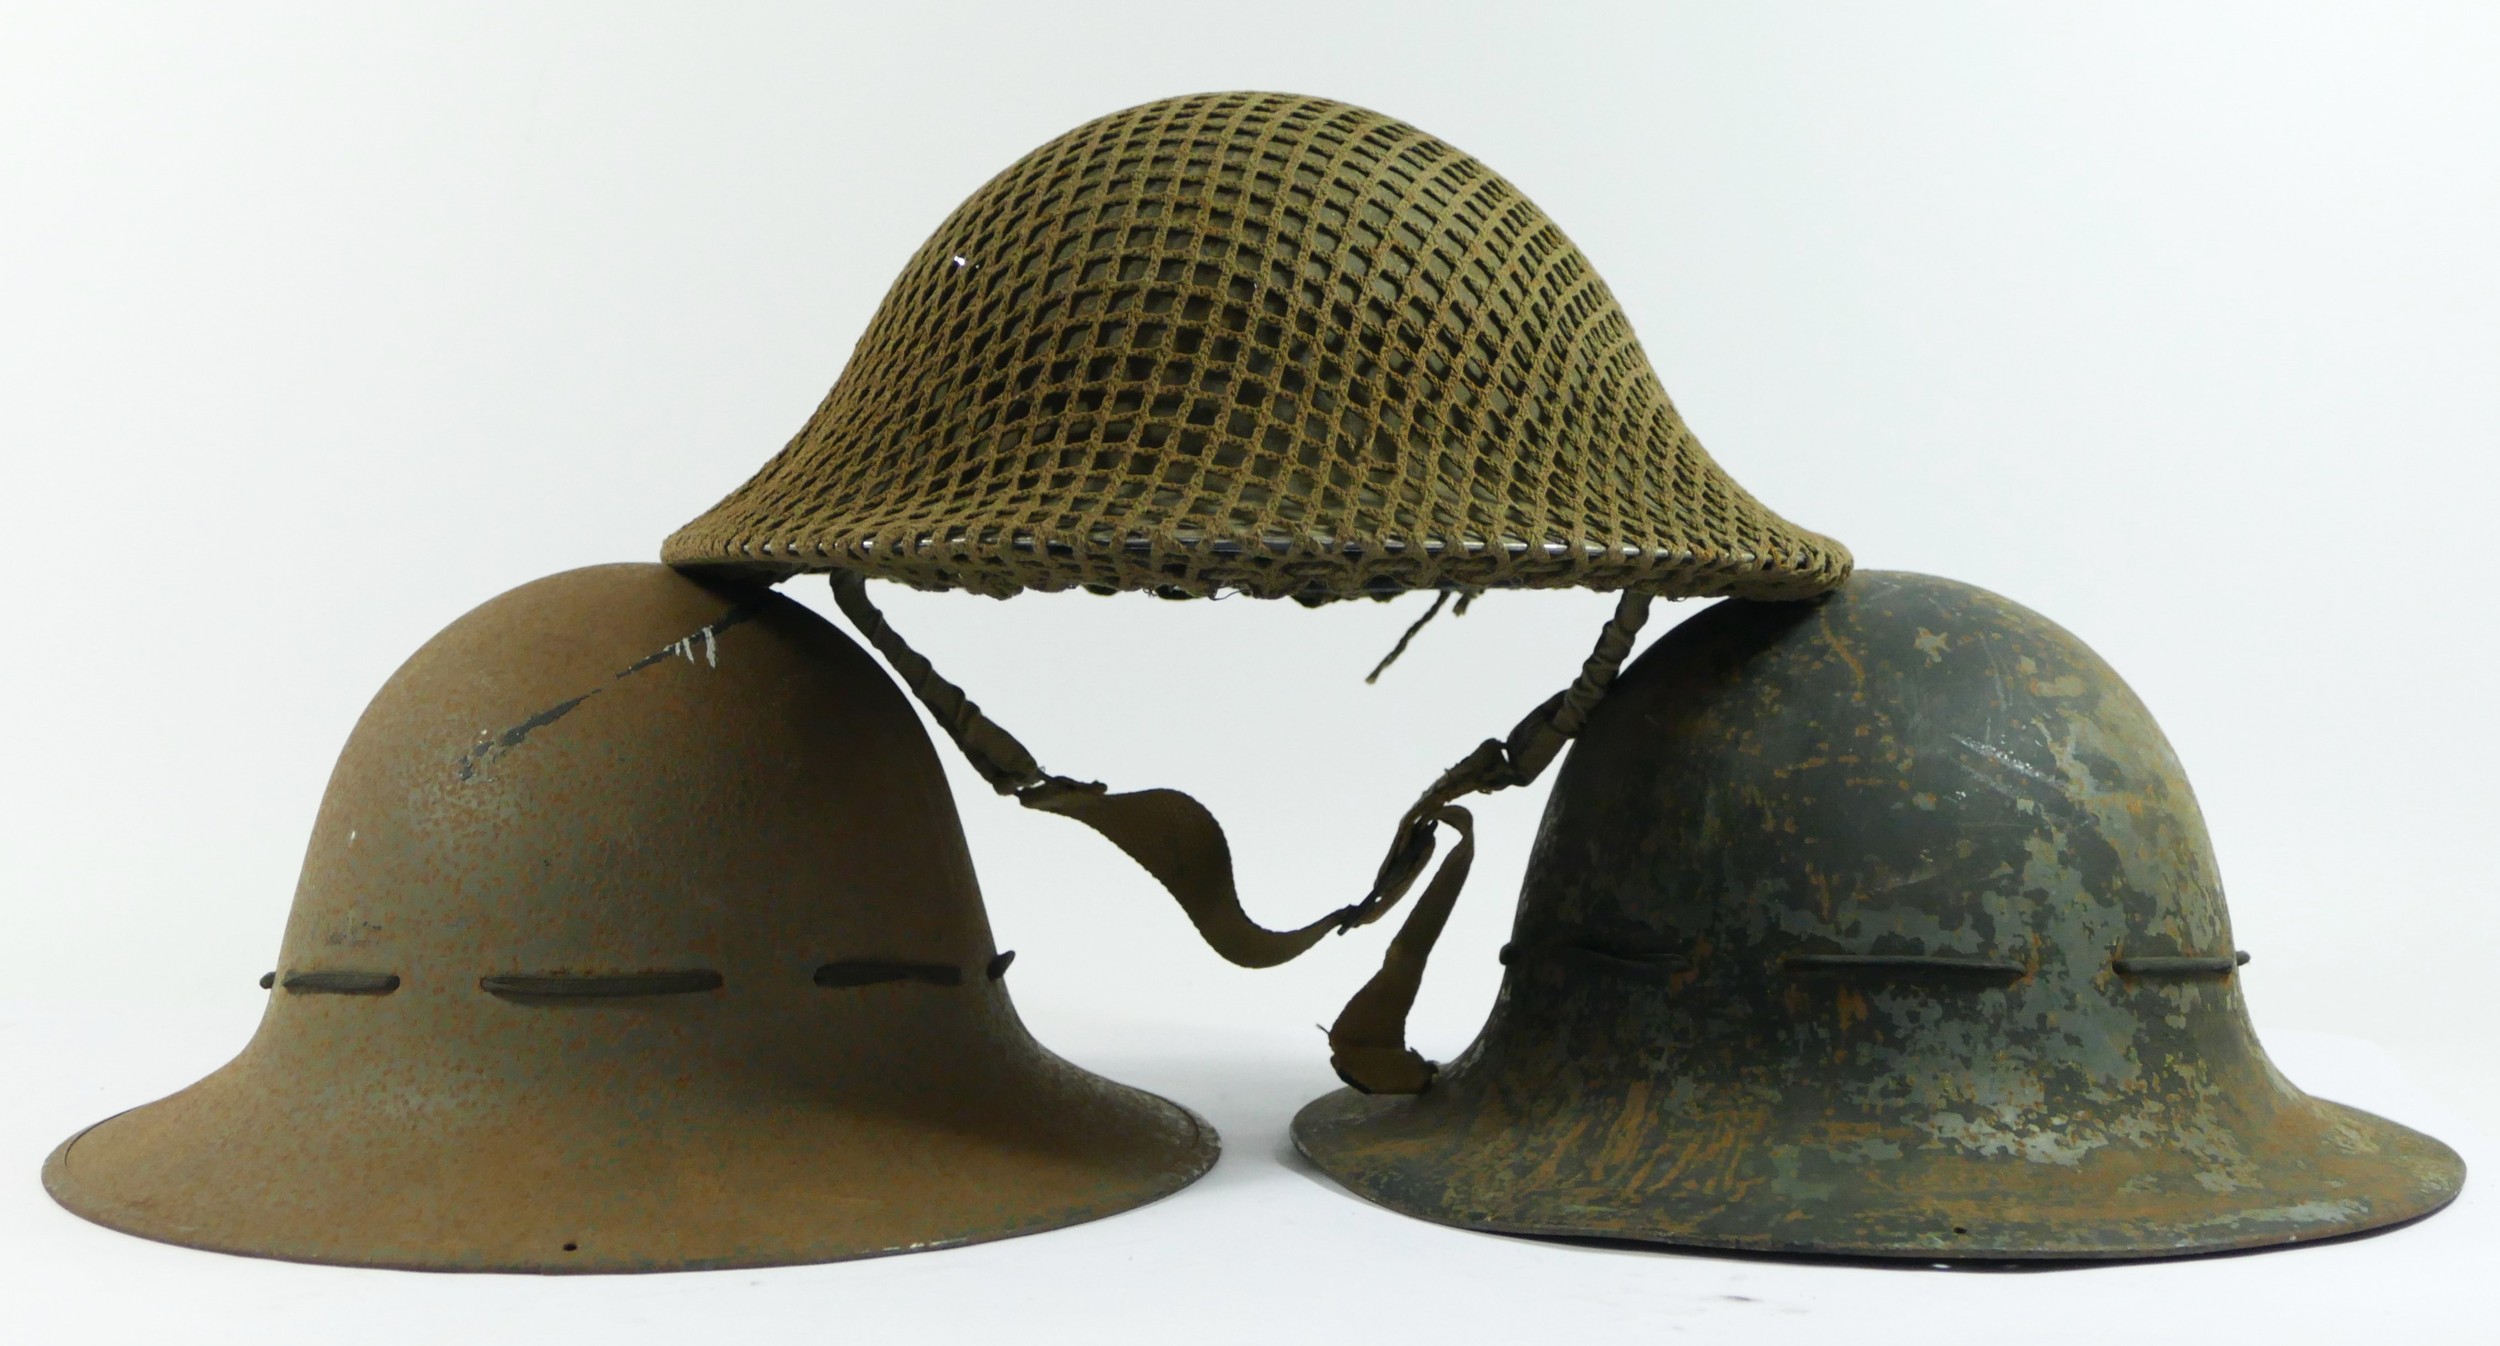 A WWII British Army Brodie helmet, dated 1941 and two WWII Zuckerman helmets, one dated 1941 (3).